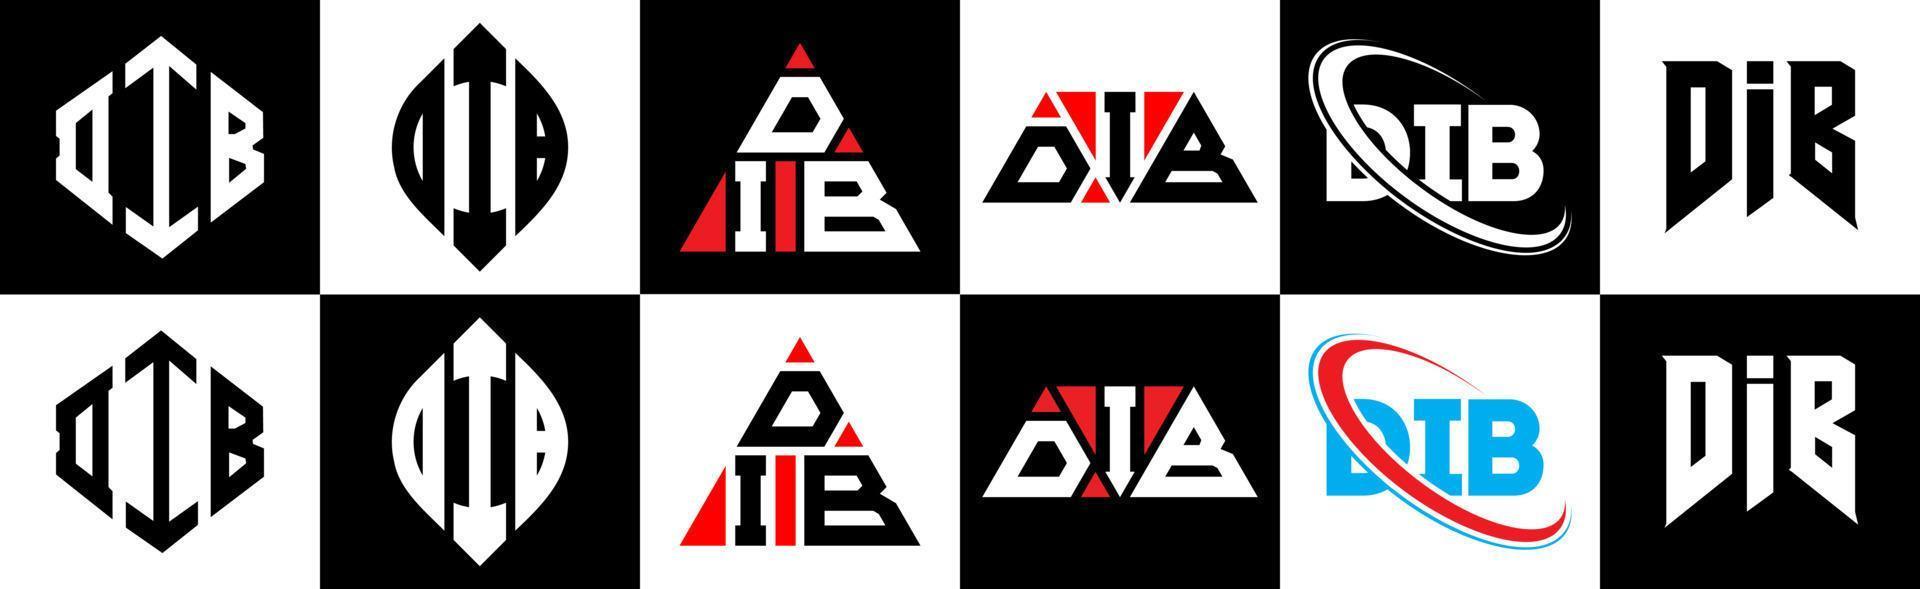 DIB letter logo design in six style. DIB polygon, circle, triangle, hexagon, flat and simple style with black and white color variation letter logo set in one artboard. DIB minimalist and classic logo vector